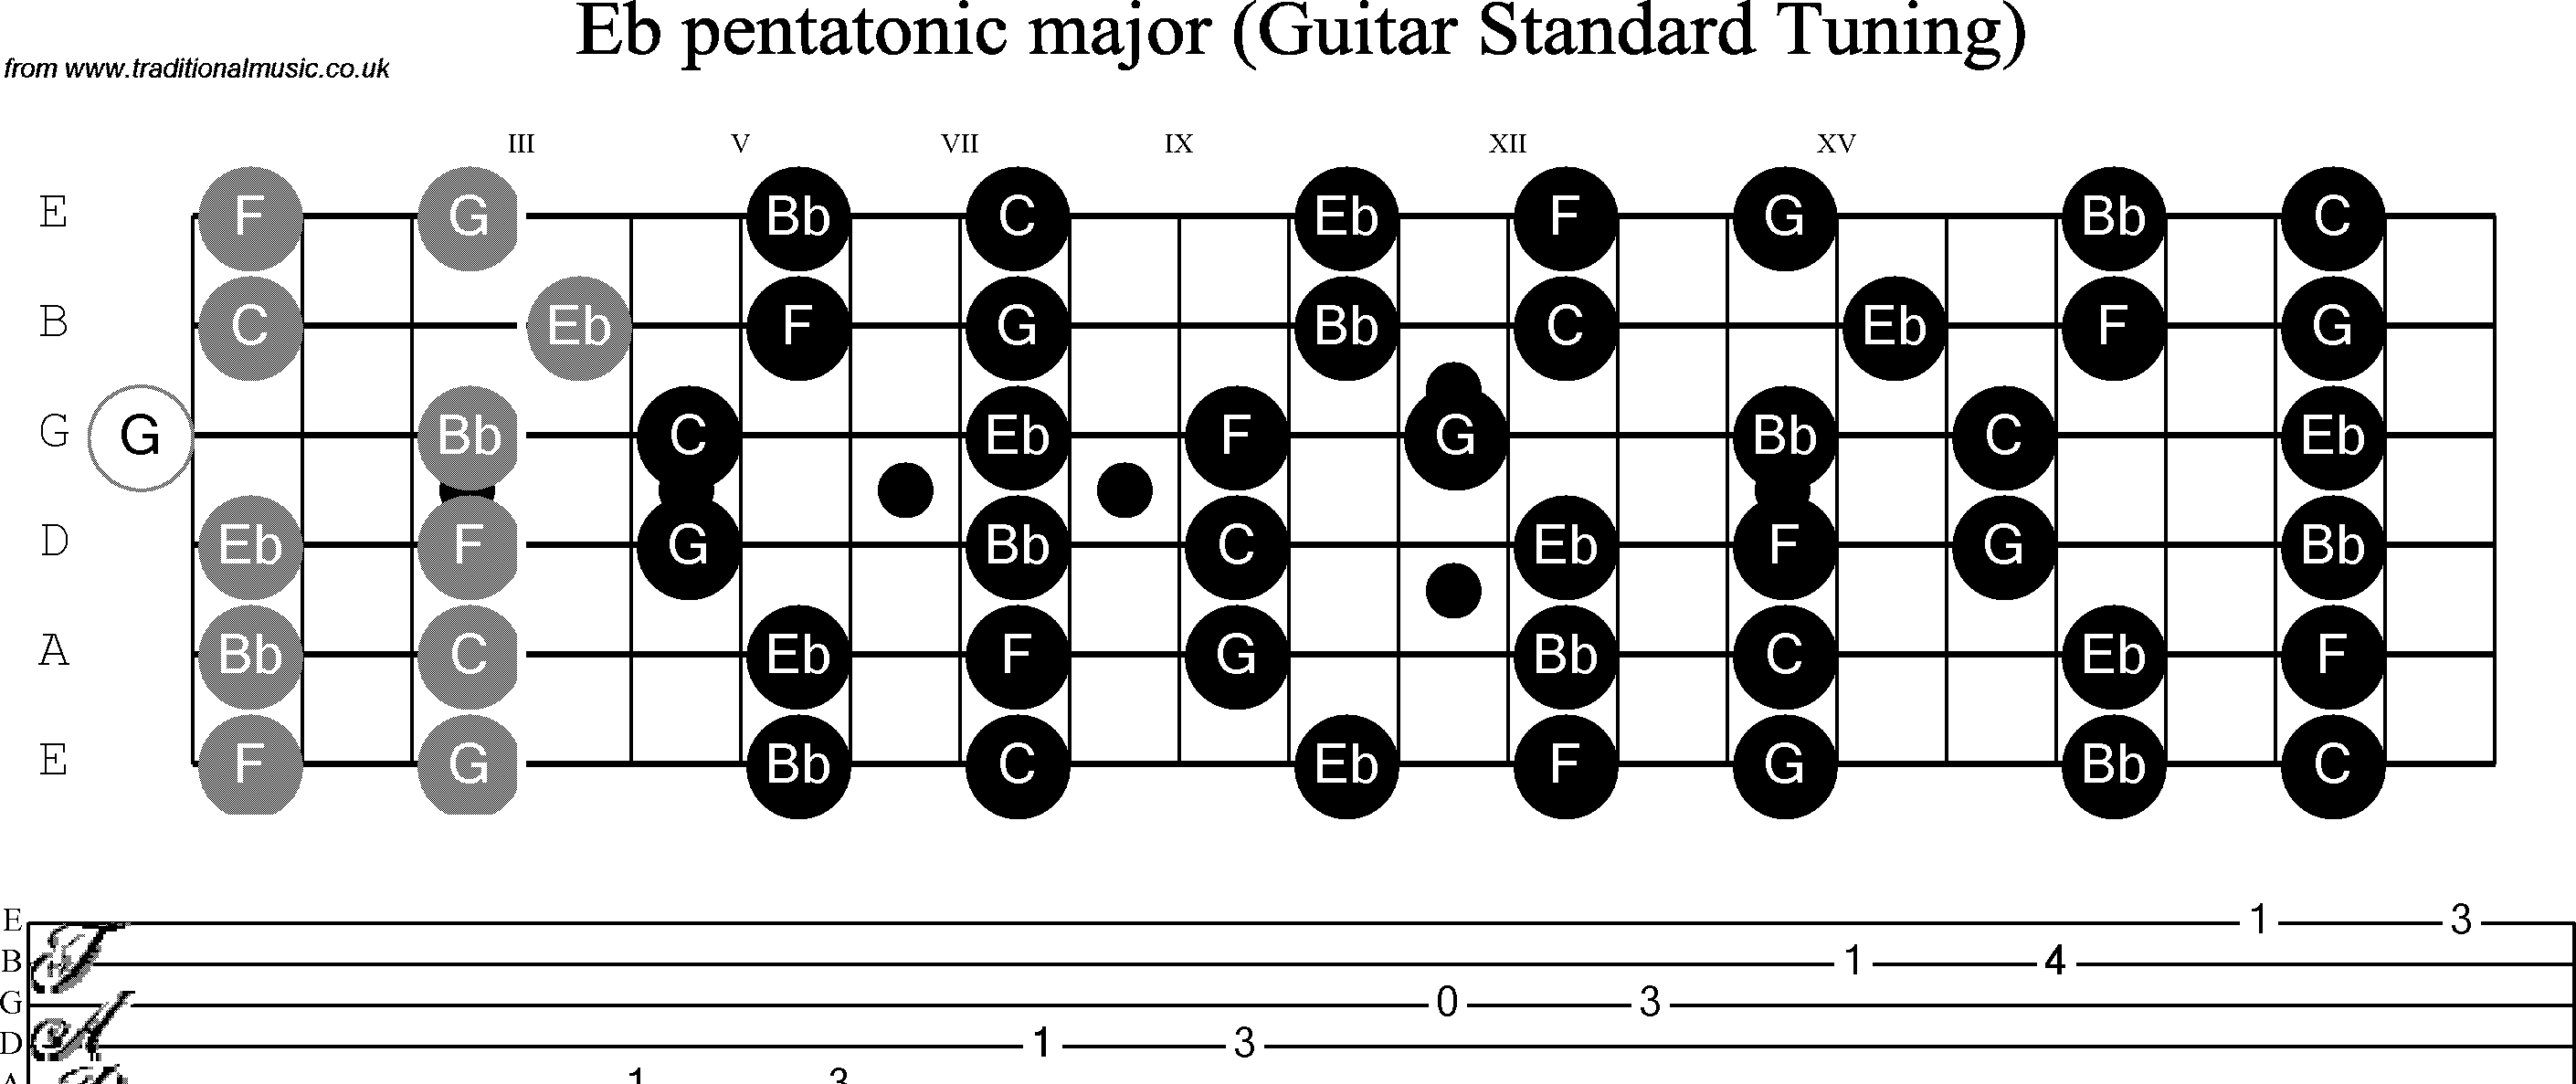 Scale, stave and neck diagram for Guitar: Eb Pentatonic